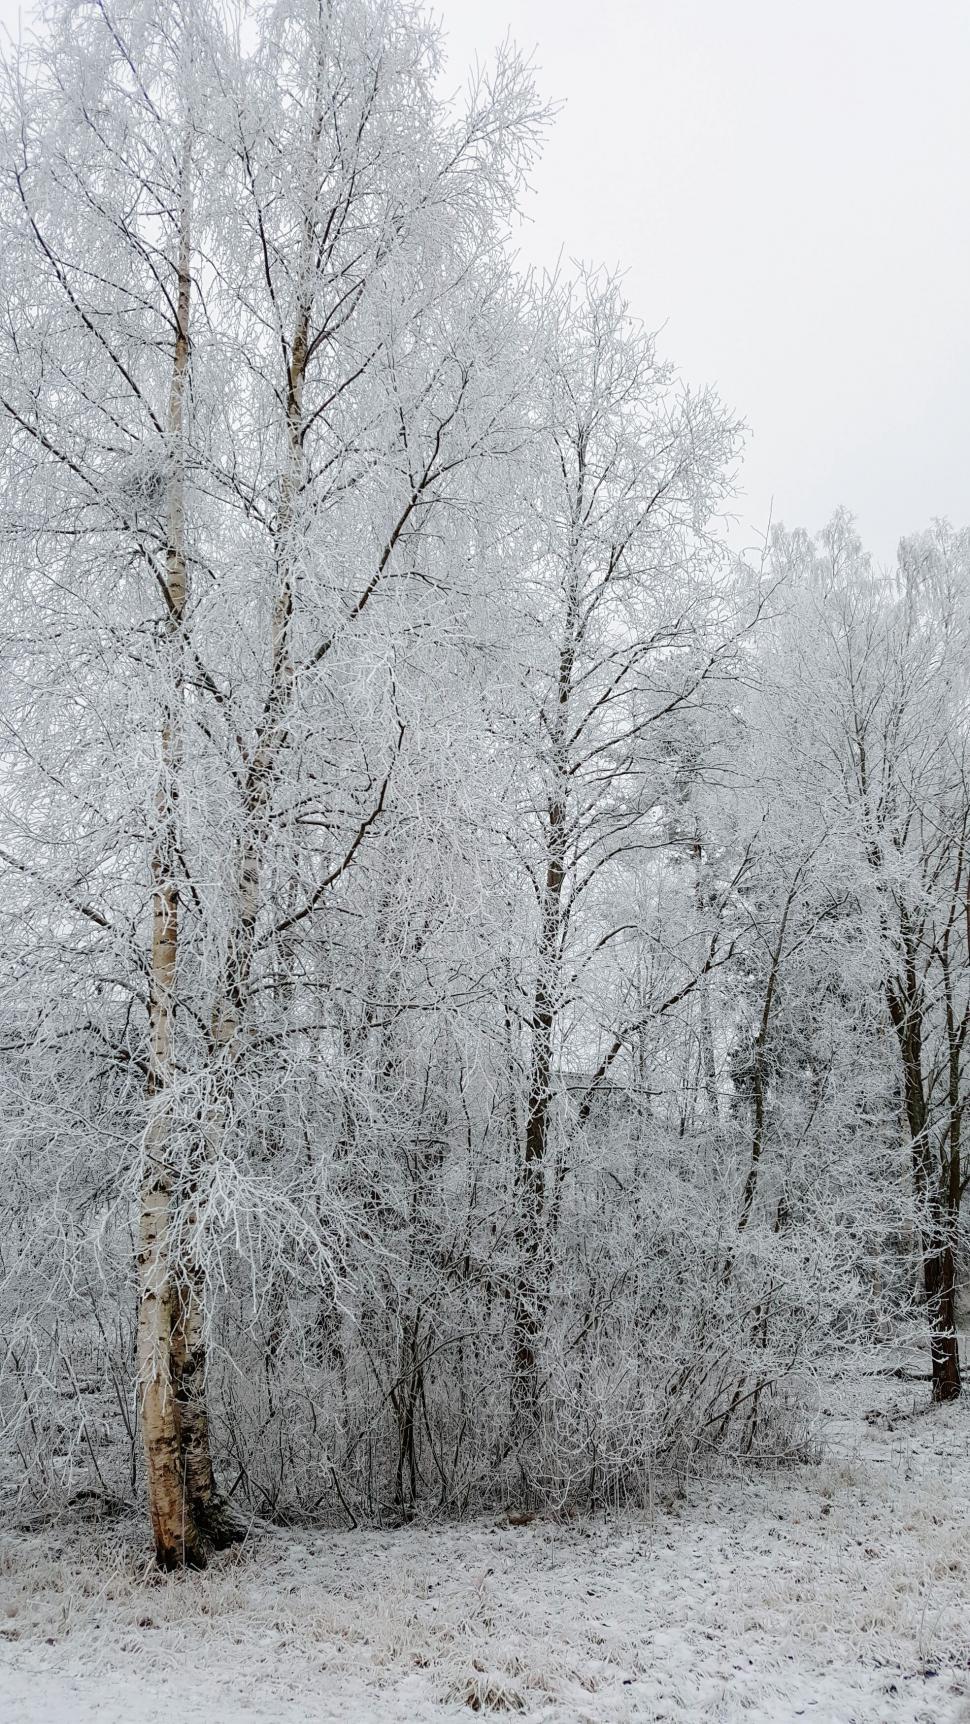 Free Image of Frosted trees in a snowy winter landscape 